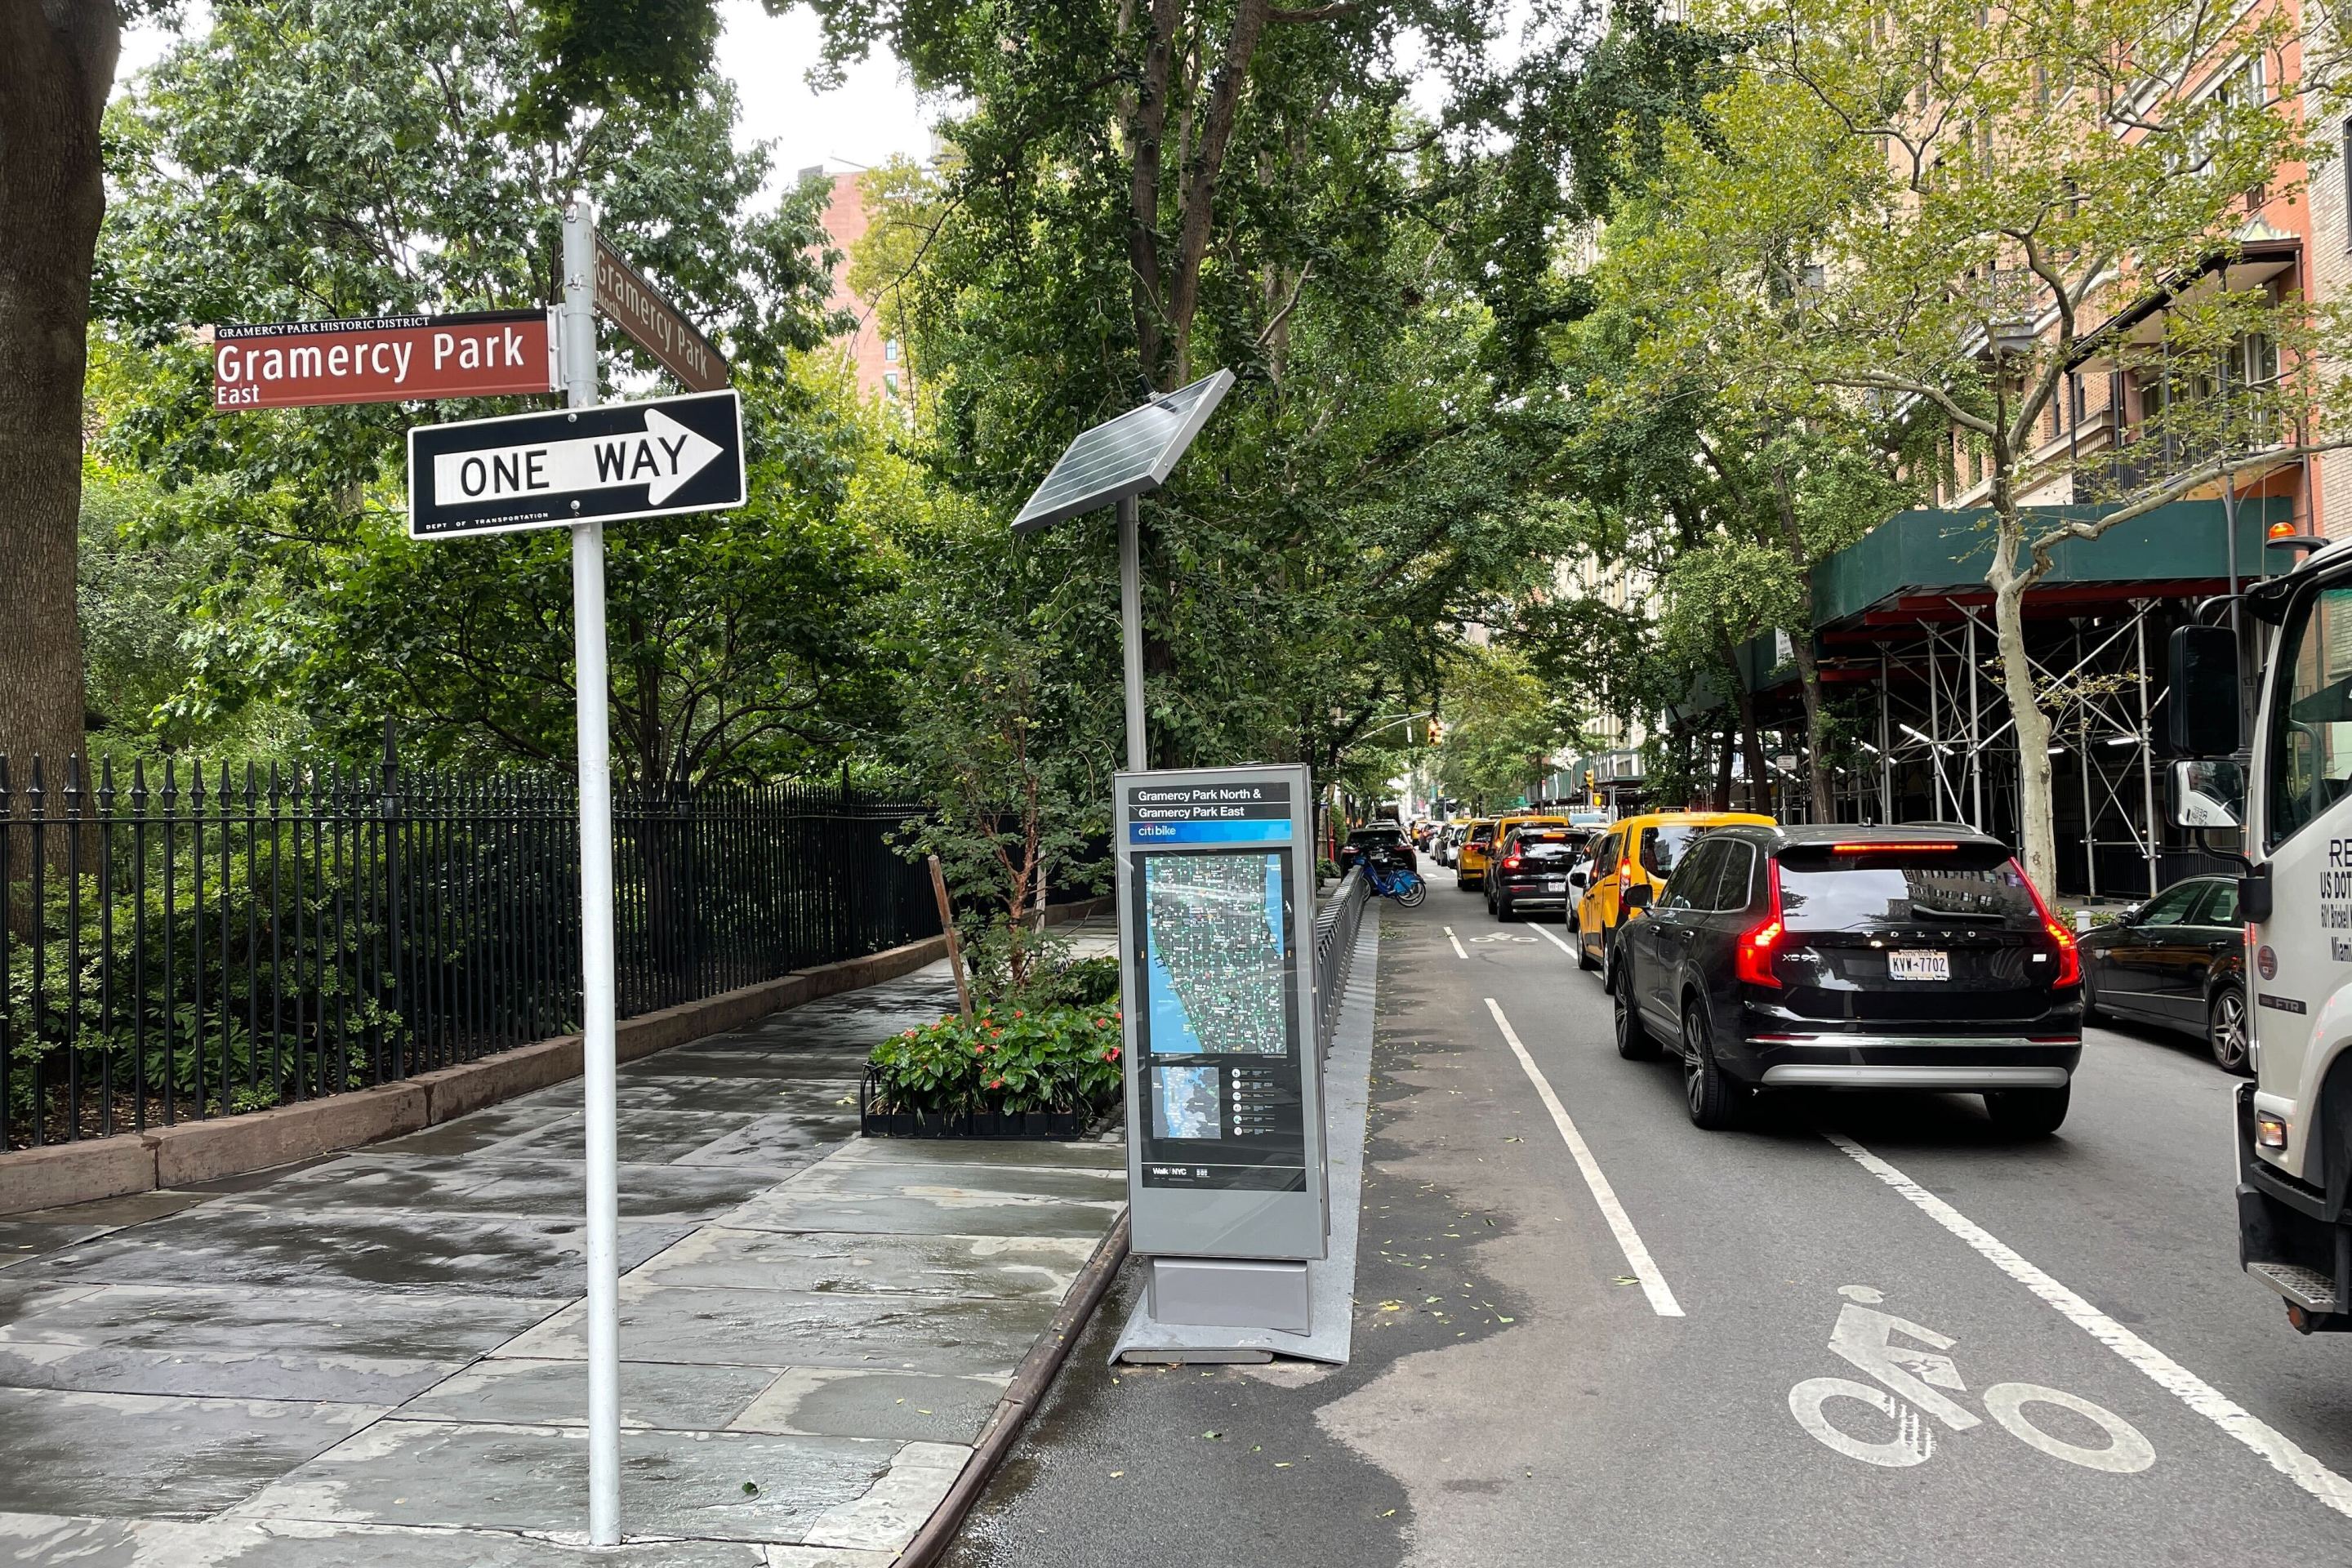 A view looking West on 21st Street, with Gramercy Park on the far left, and the Citi Bike rack sitting on 21st Street, with traffic in the bike lane.